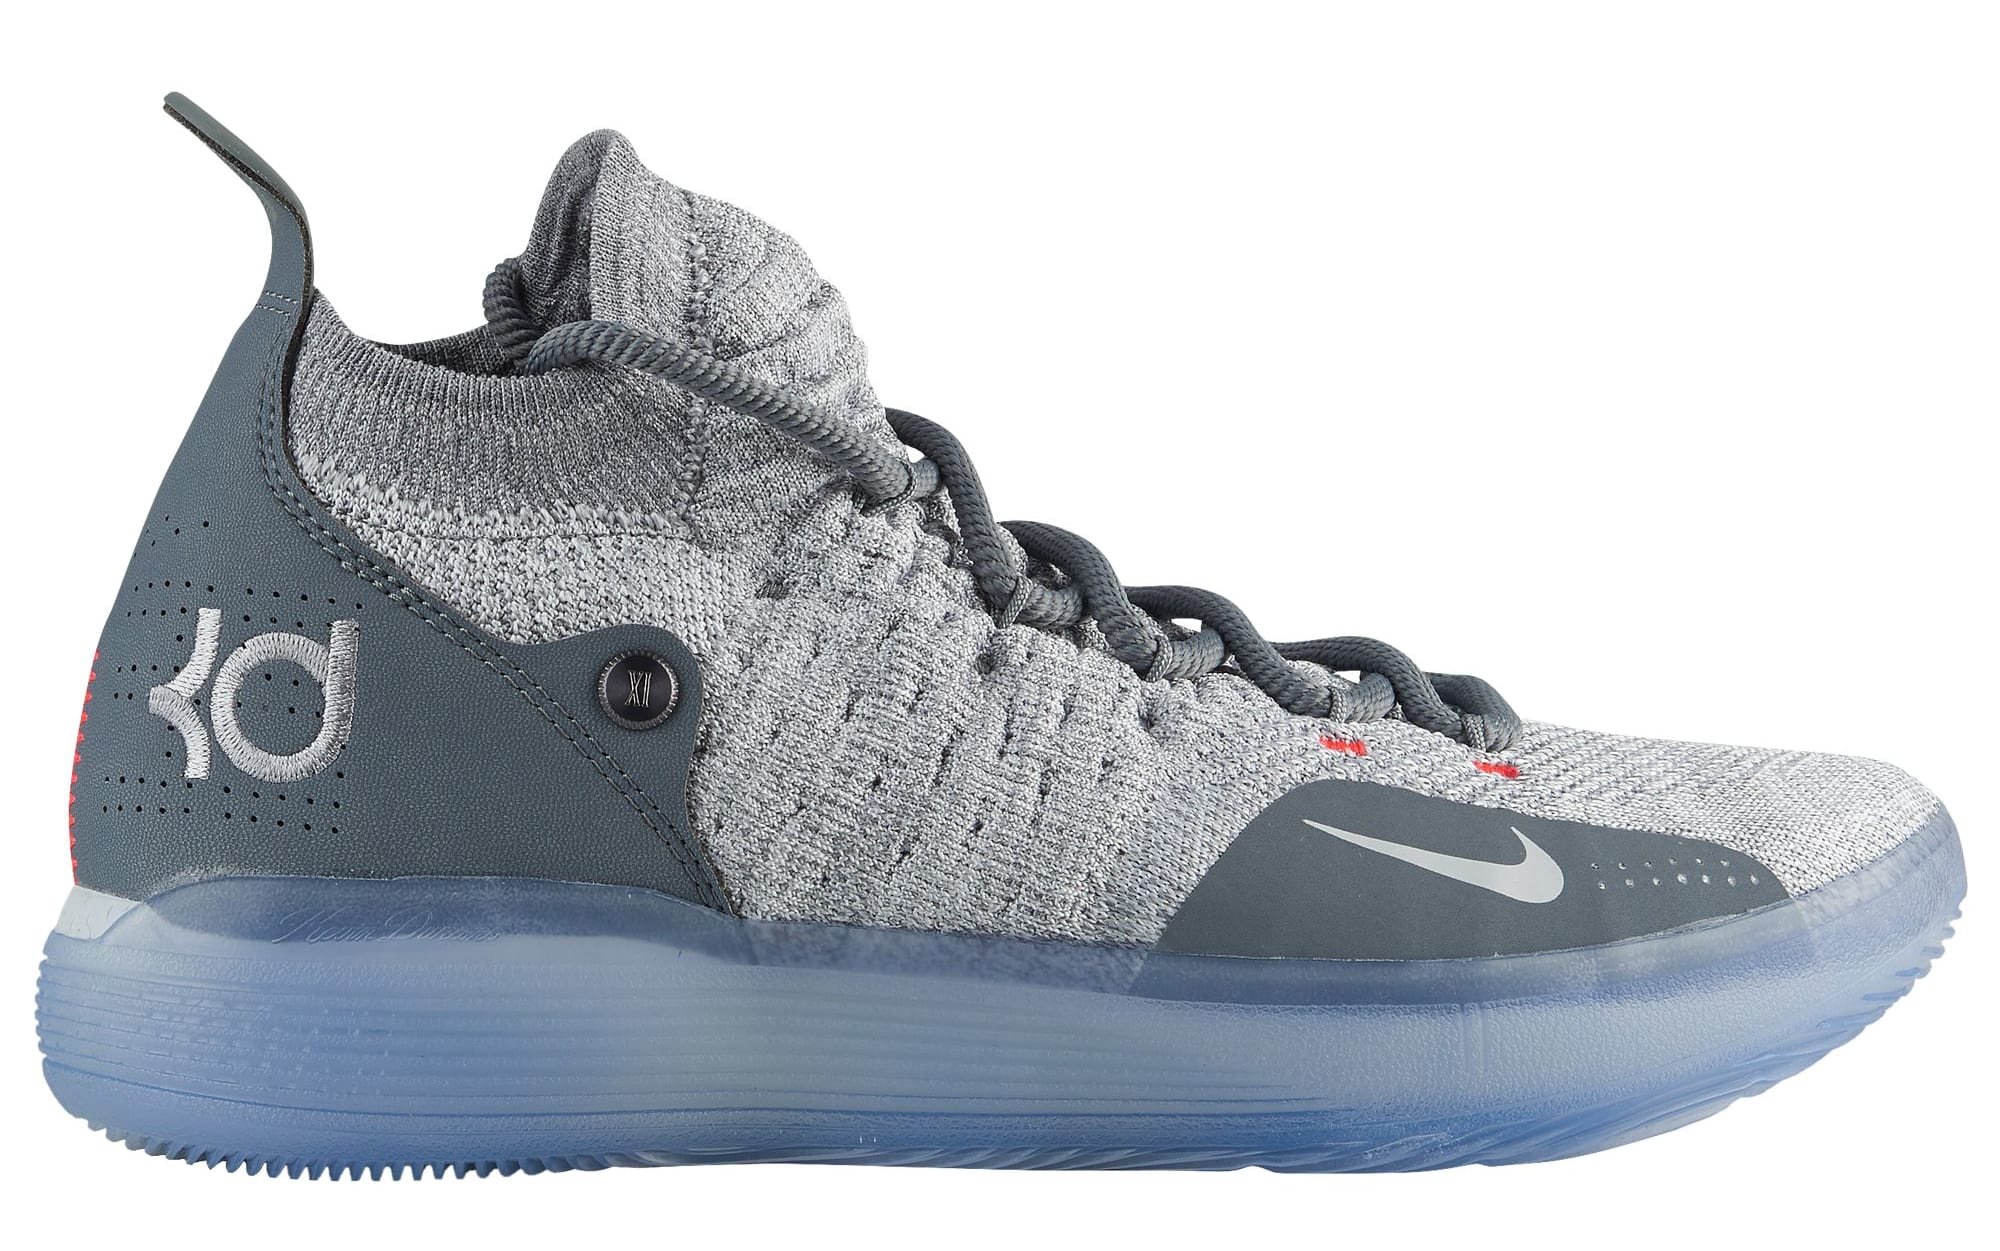 nike-kd-11-cool-grey-ao2604-002-lateral